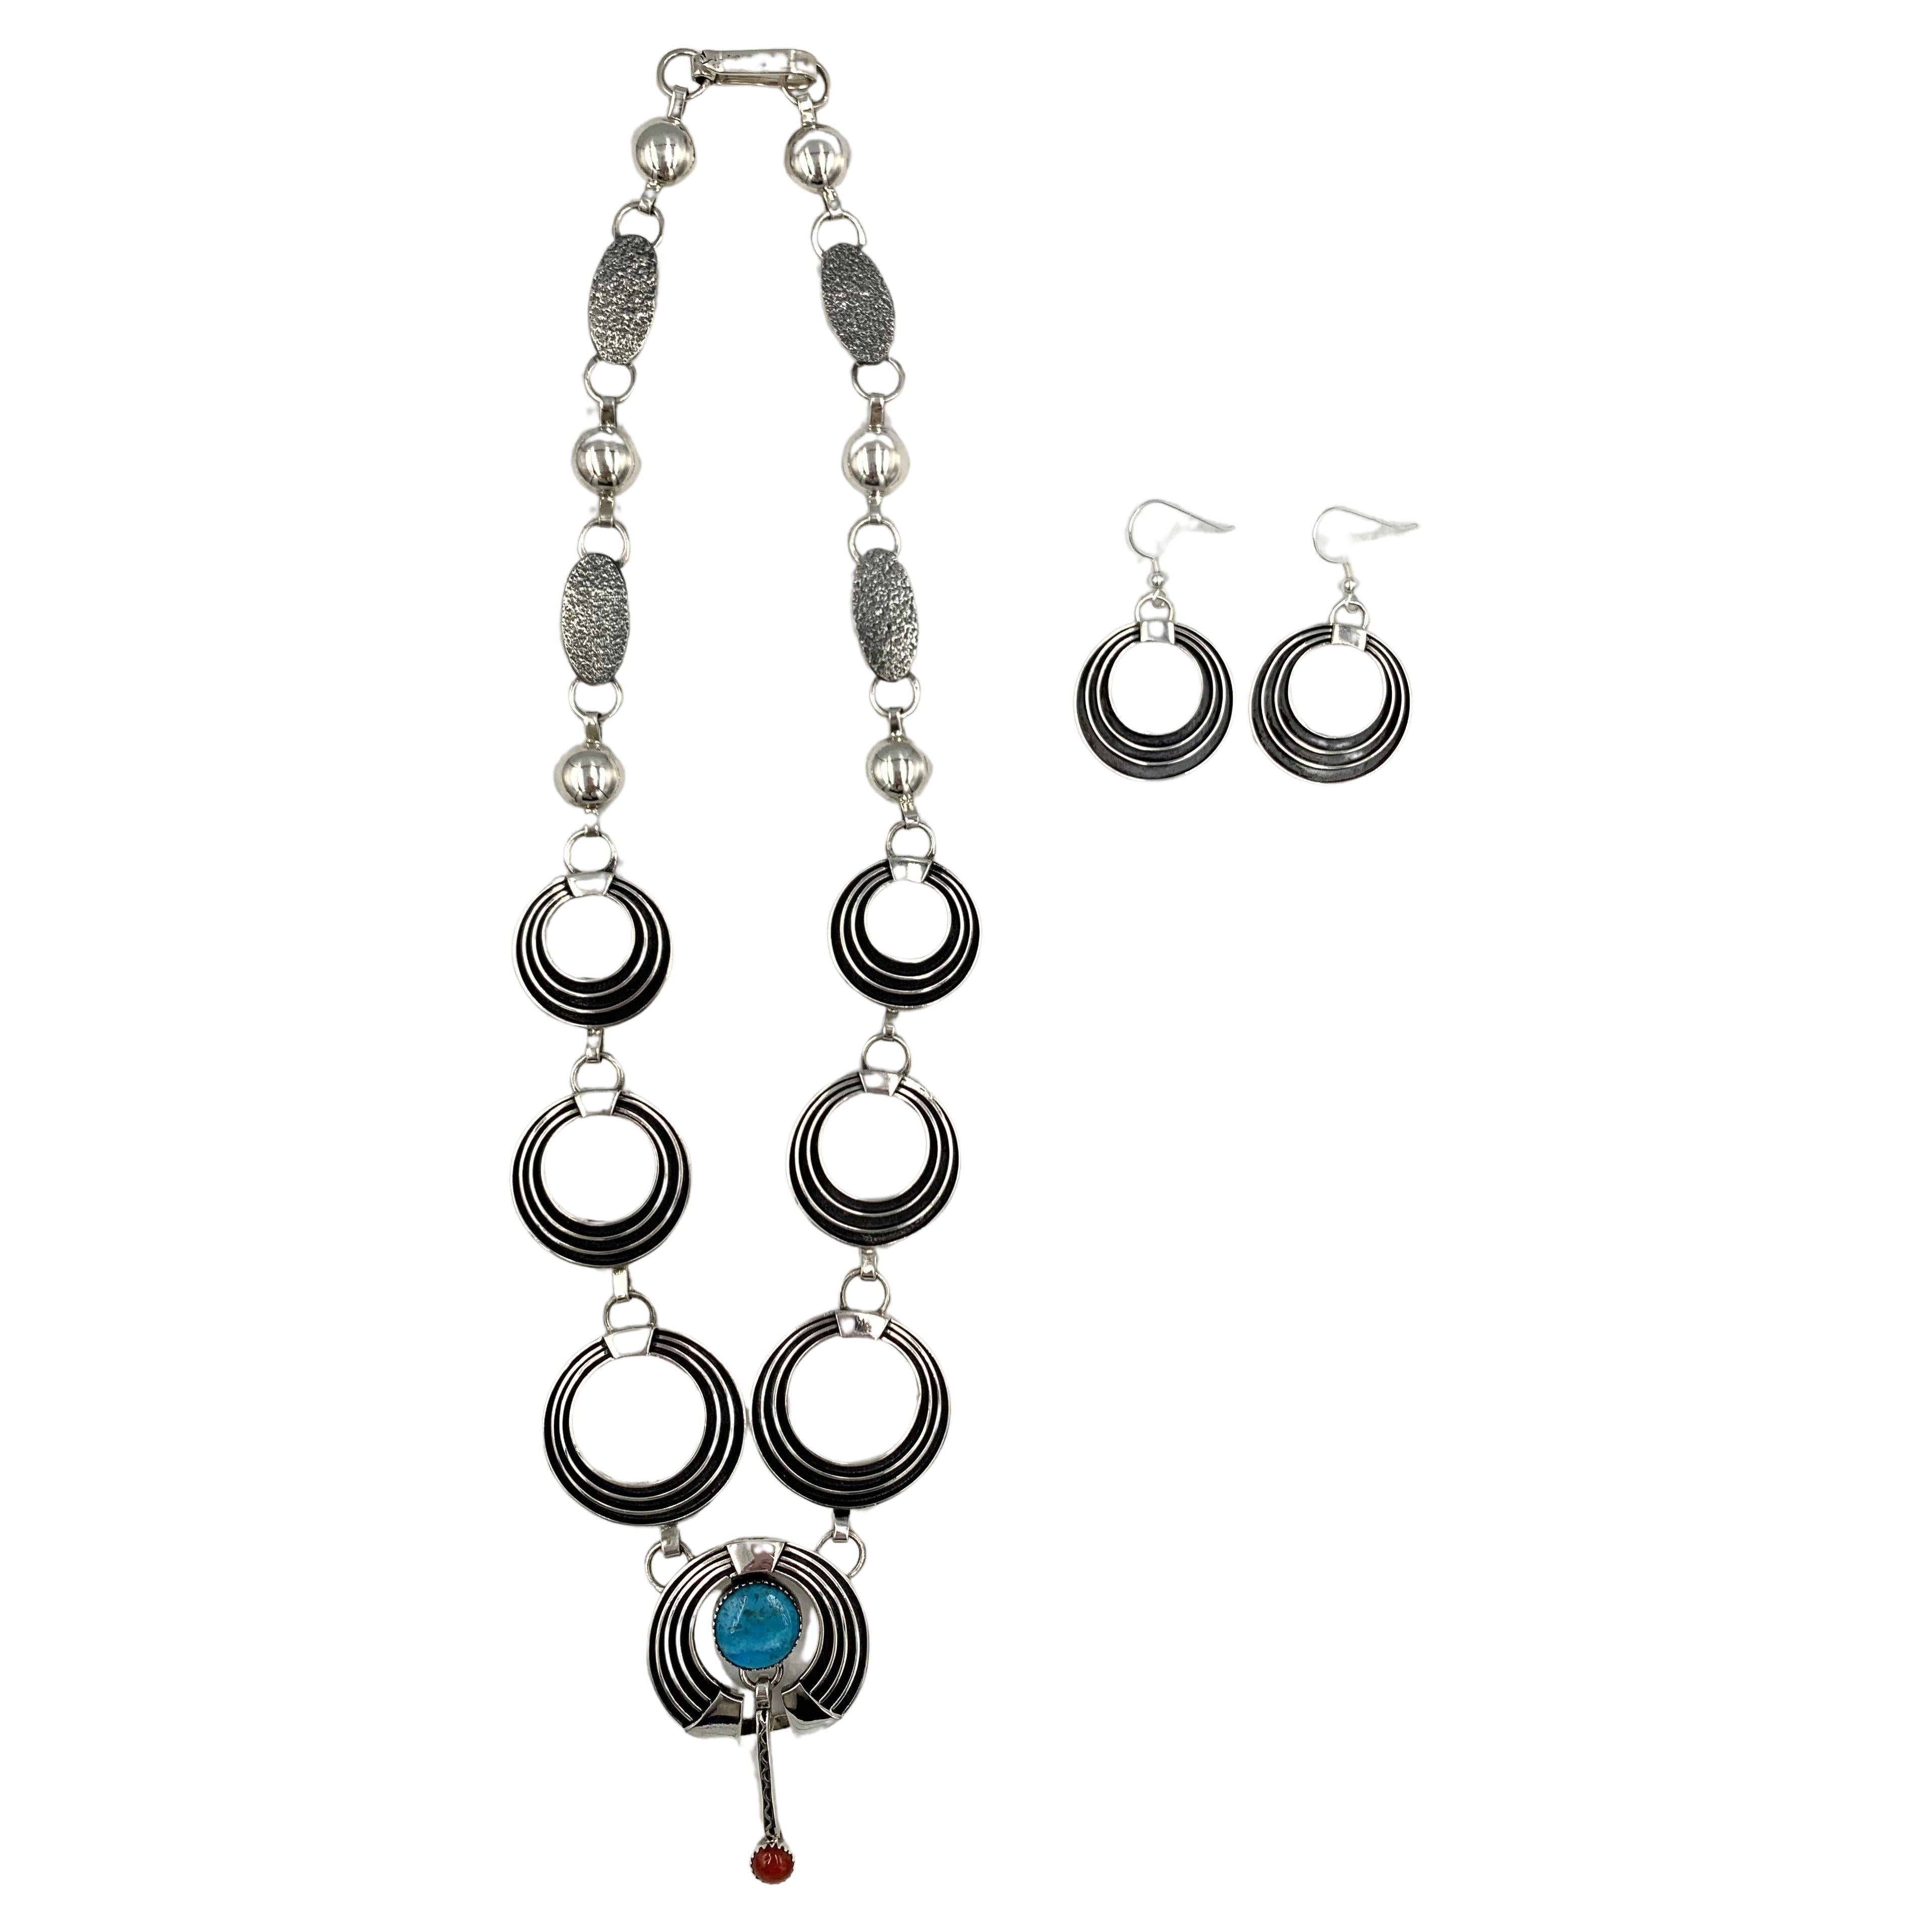 Sterling silver and inlay necklace and earrings set by Navajo silversmith Jack Tom. The pendant has turquoise and coral.

Tom's signature design is sleek and elegant with refined oxidized ridges against bright sterling silver. The contrast of